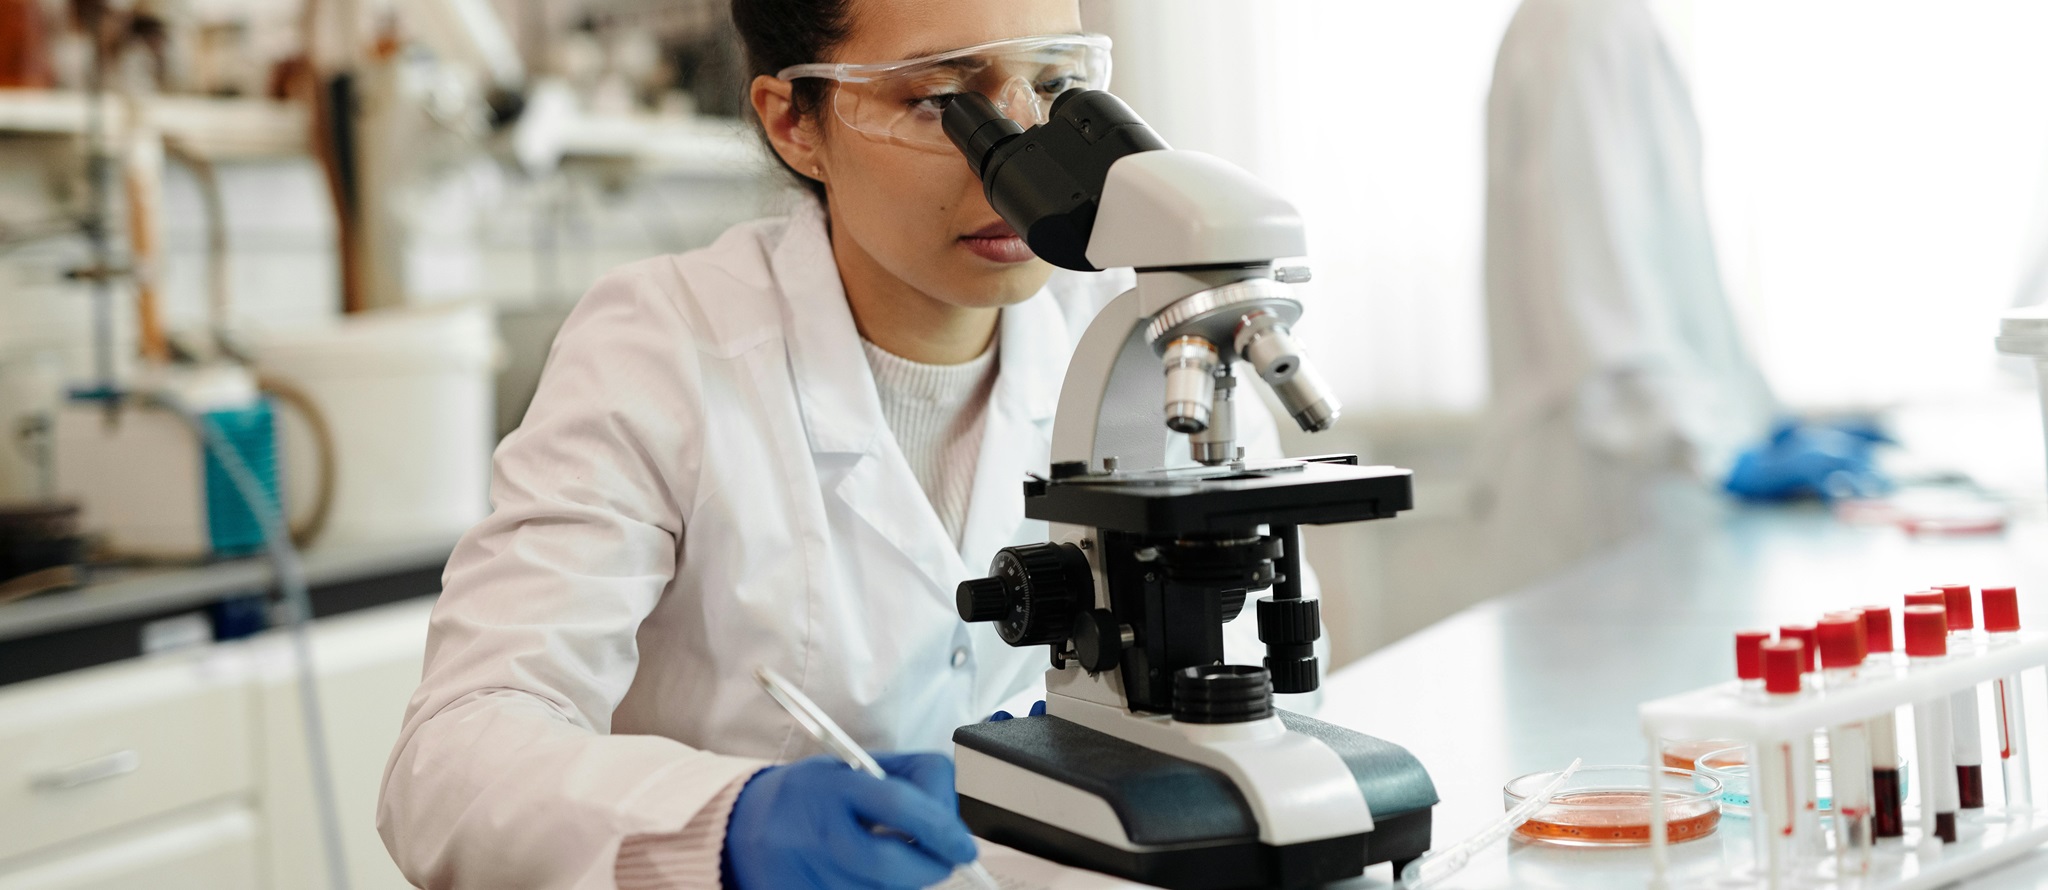 A photo of a female researcher looking through a microscope in a lab, while writing down what she sees. In the back there is another researcher visible wearing a white lab coat.